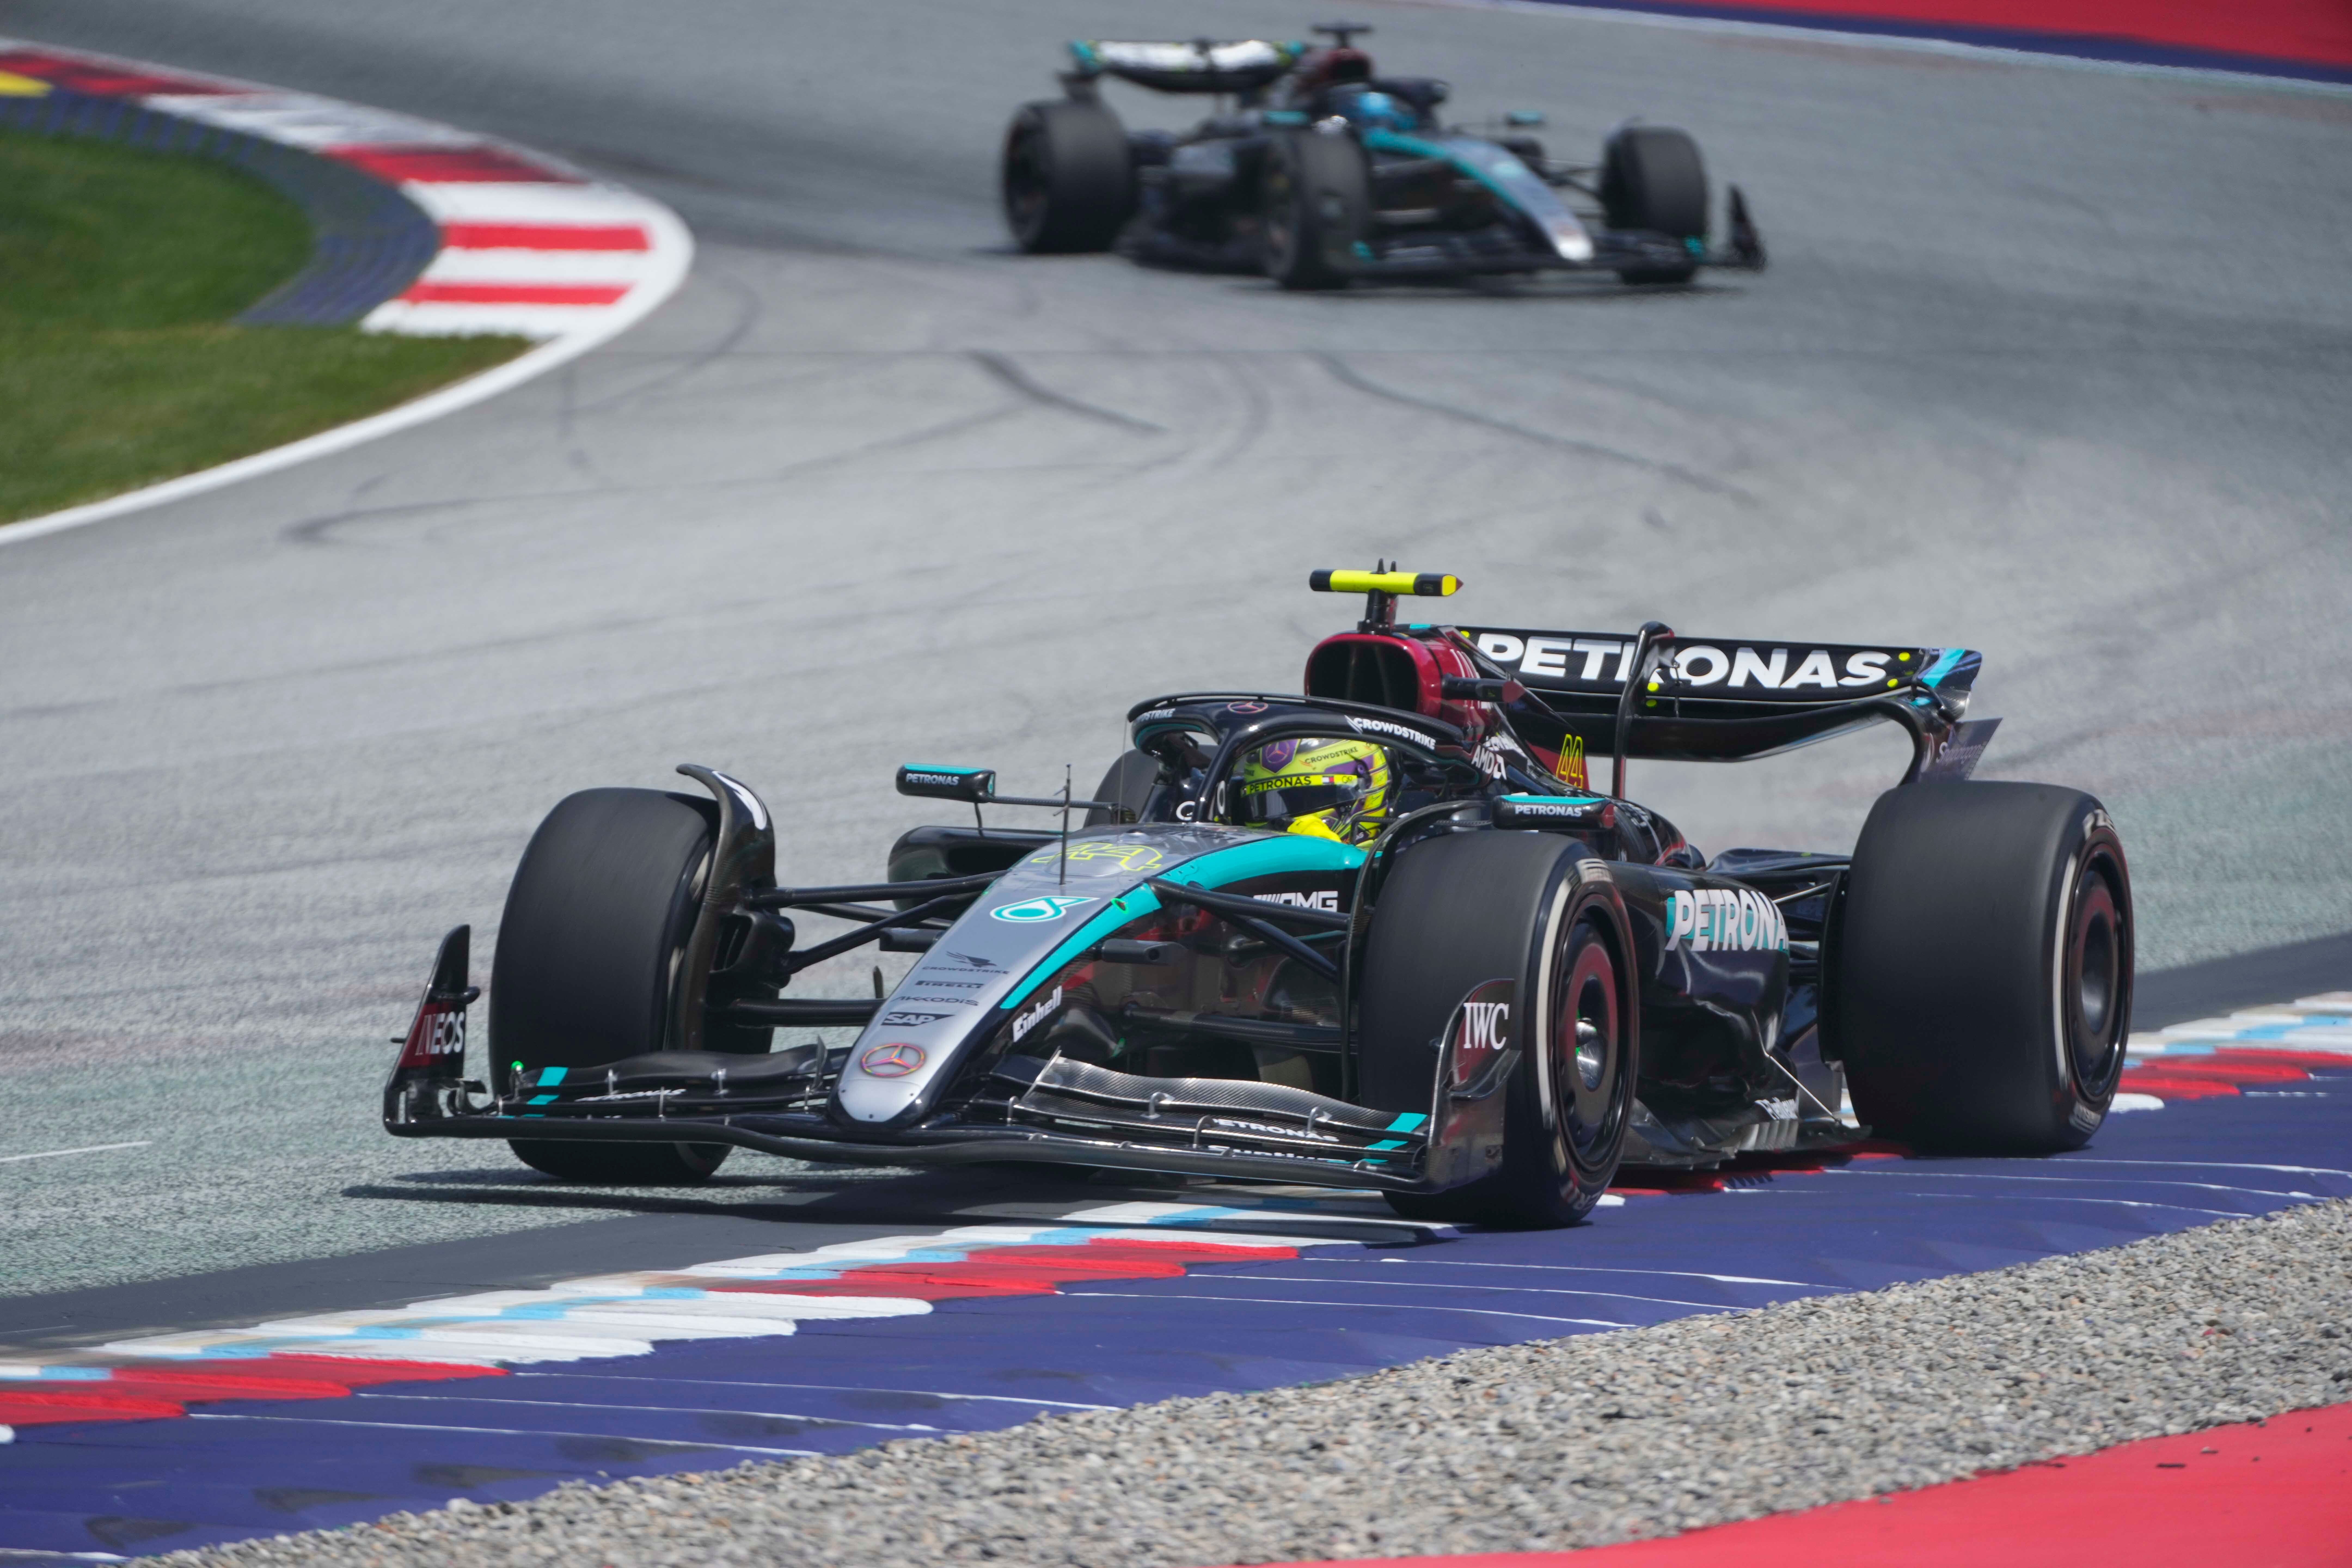 pa ready, max verstappen, george russell, austria, dutch, red bull, charles leclerc, oscar piastri, red bull ring, lewis hamilton, british, max verstappen tops the timesheets in austria